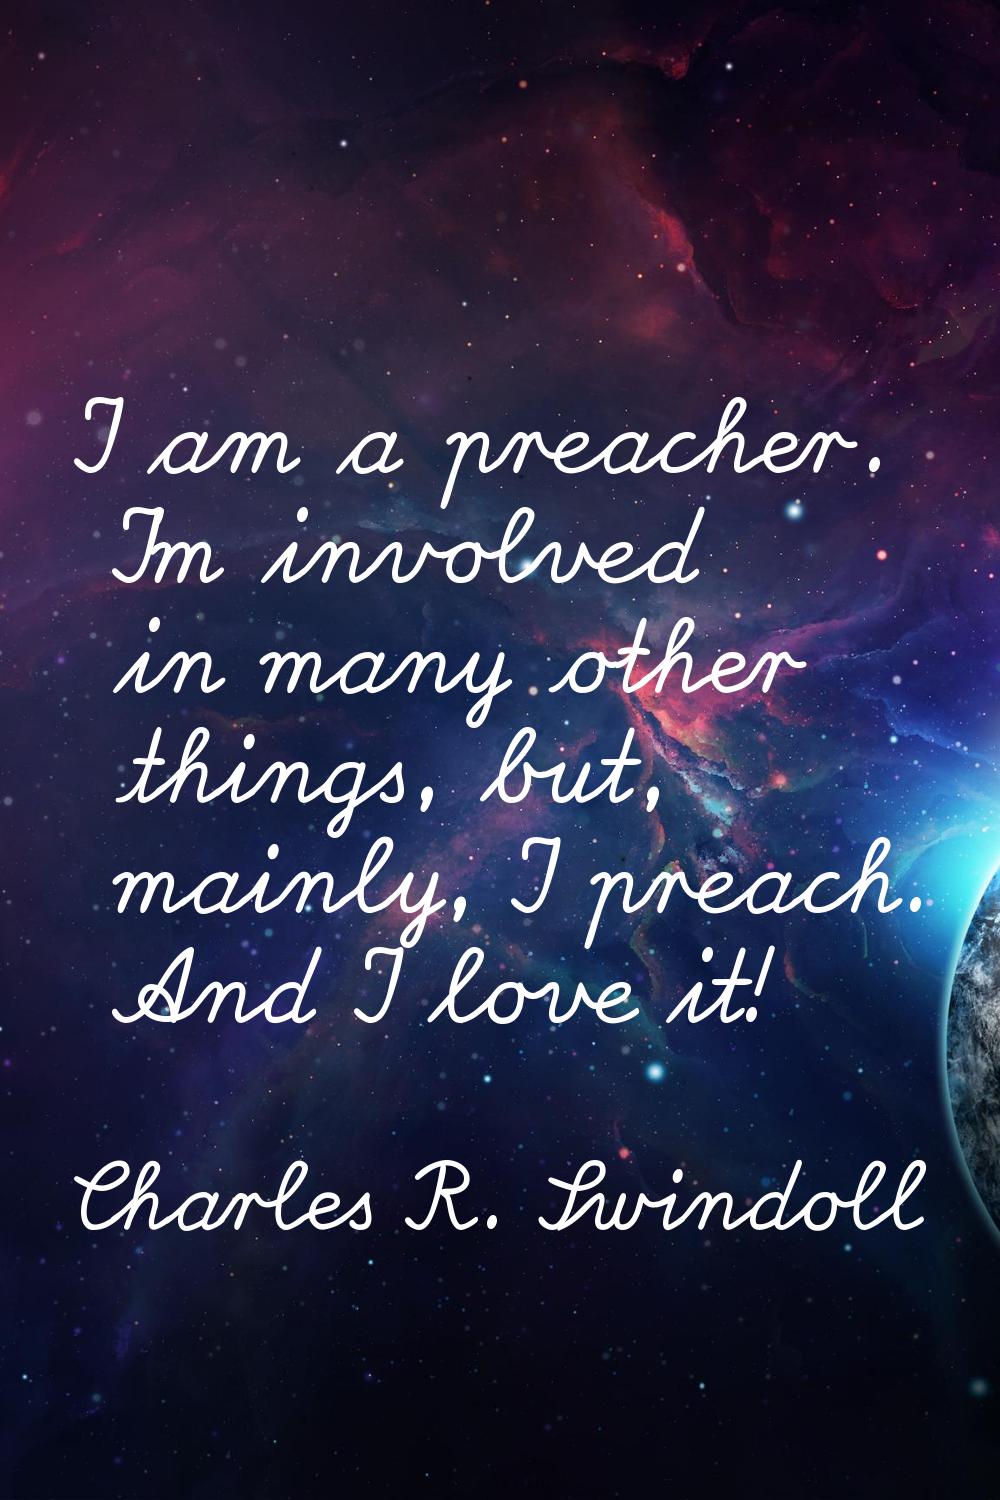 I am a preacher. I'm involved in many other things, but, mainly, I preach. And I love it!